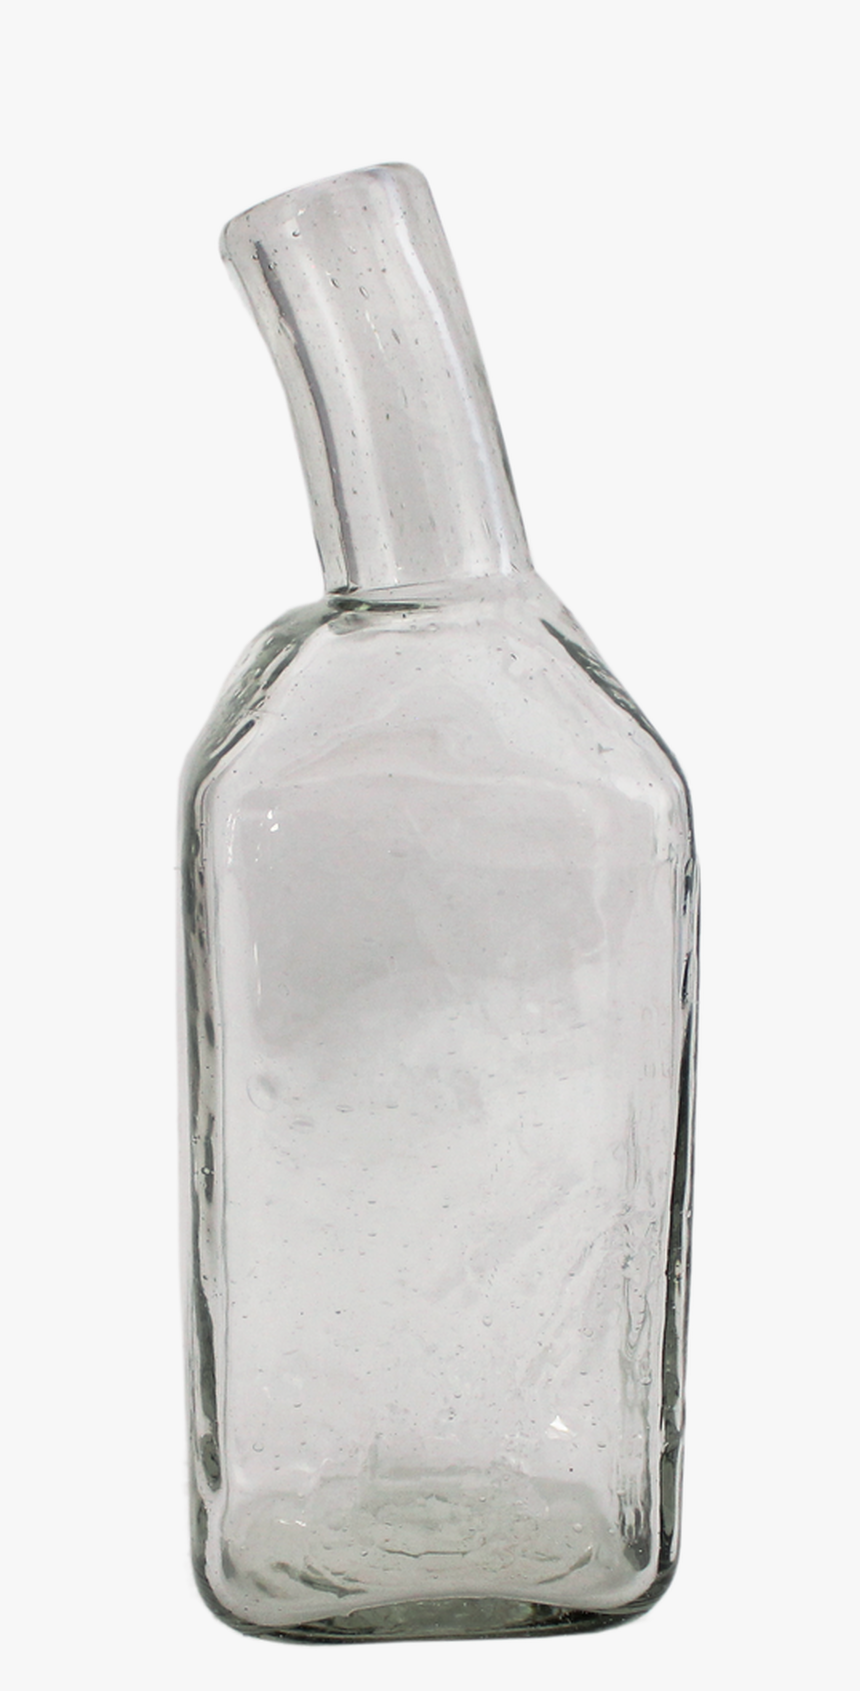 Handmade Crooked Neck Glass Bottle
this Unique Bottle - Bottle With Crooked Neck, HD Png Download, Free Download